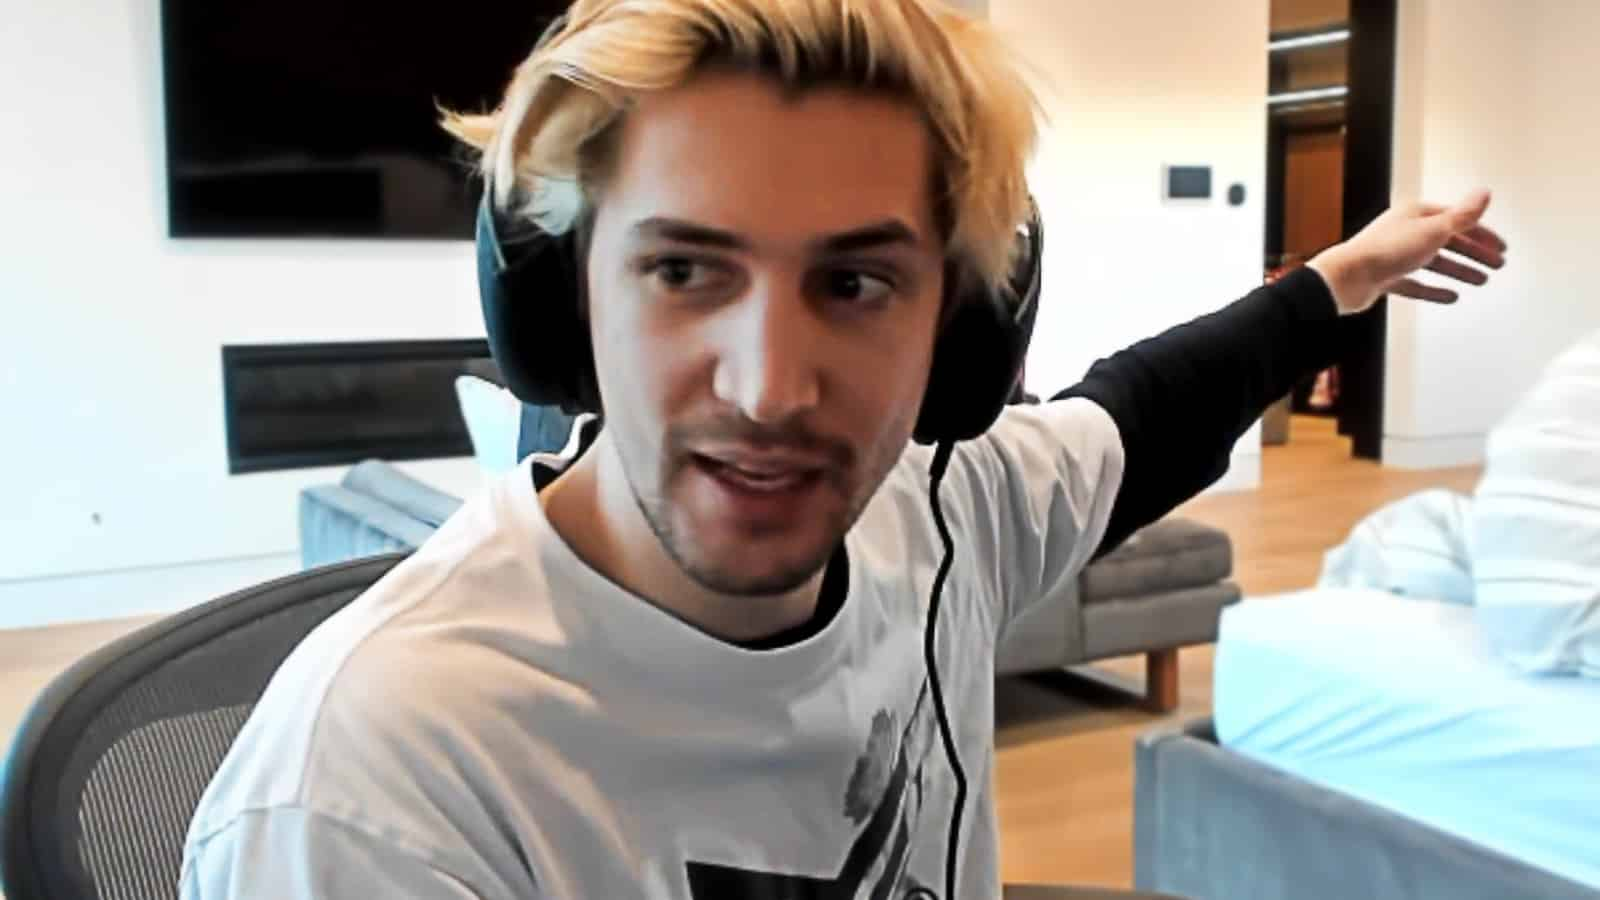 xQc Twitch TV stream: streamer responds to criticism over his react streams